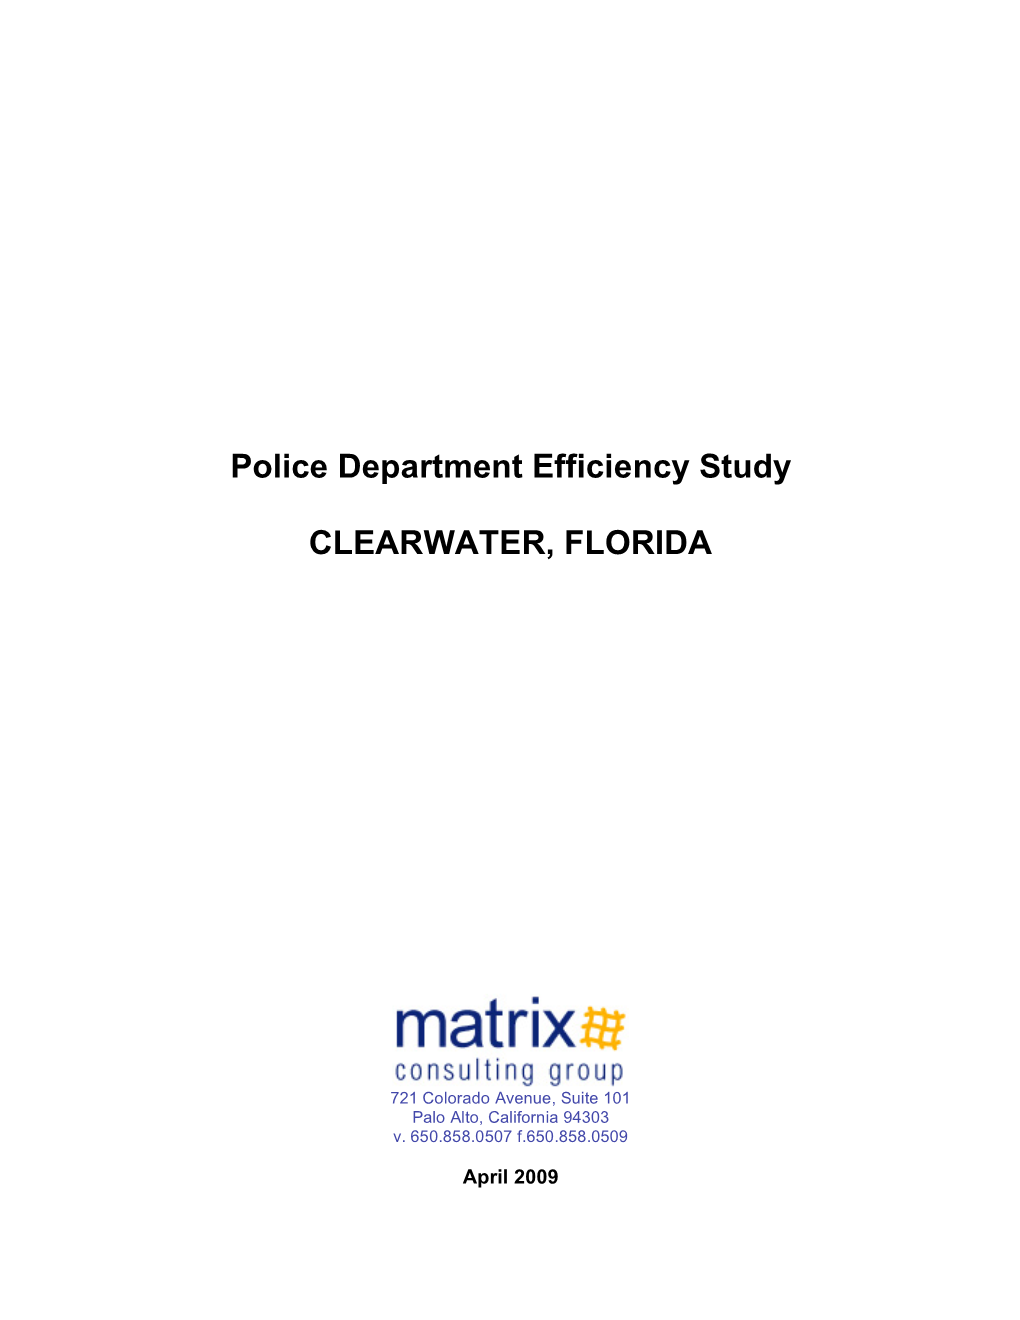 Police Department Efficiency Study CLEARWATER, FLORIDA